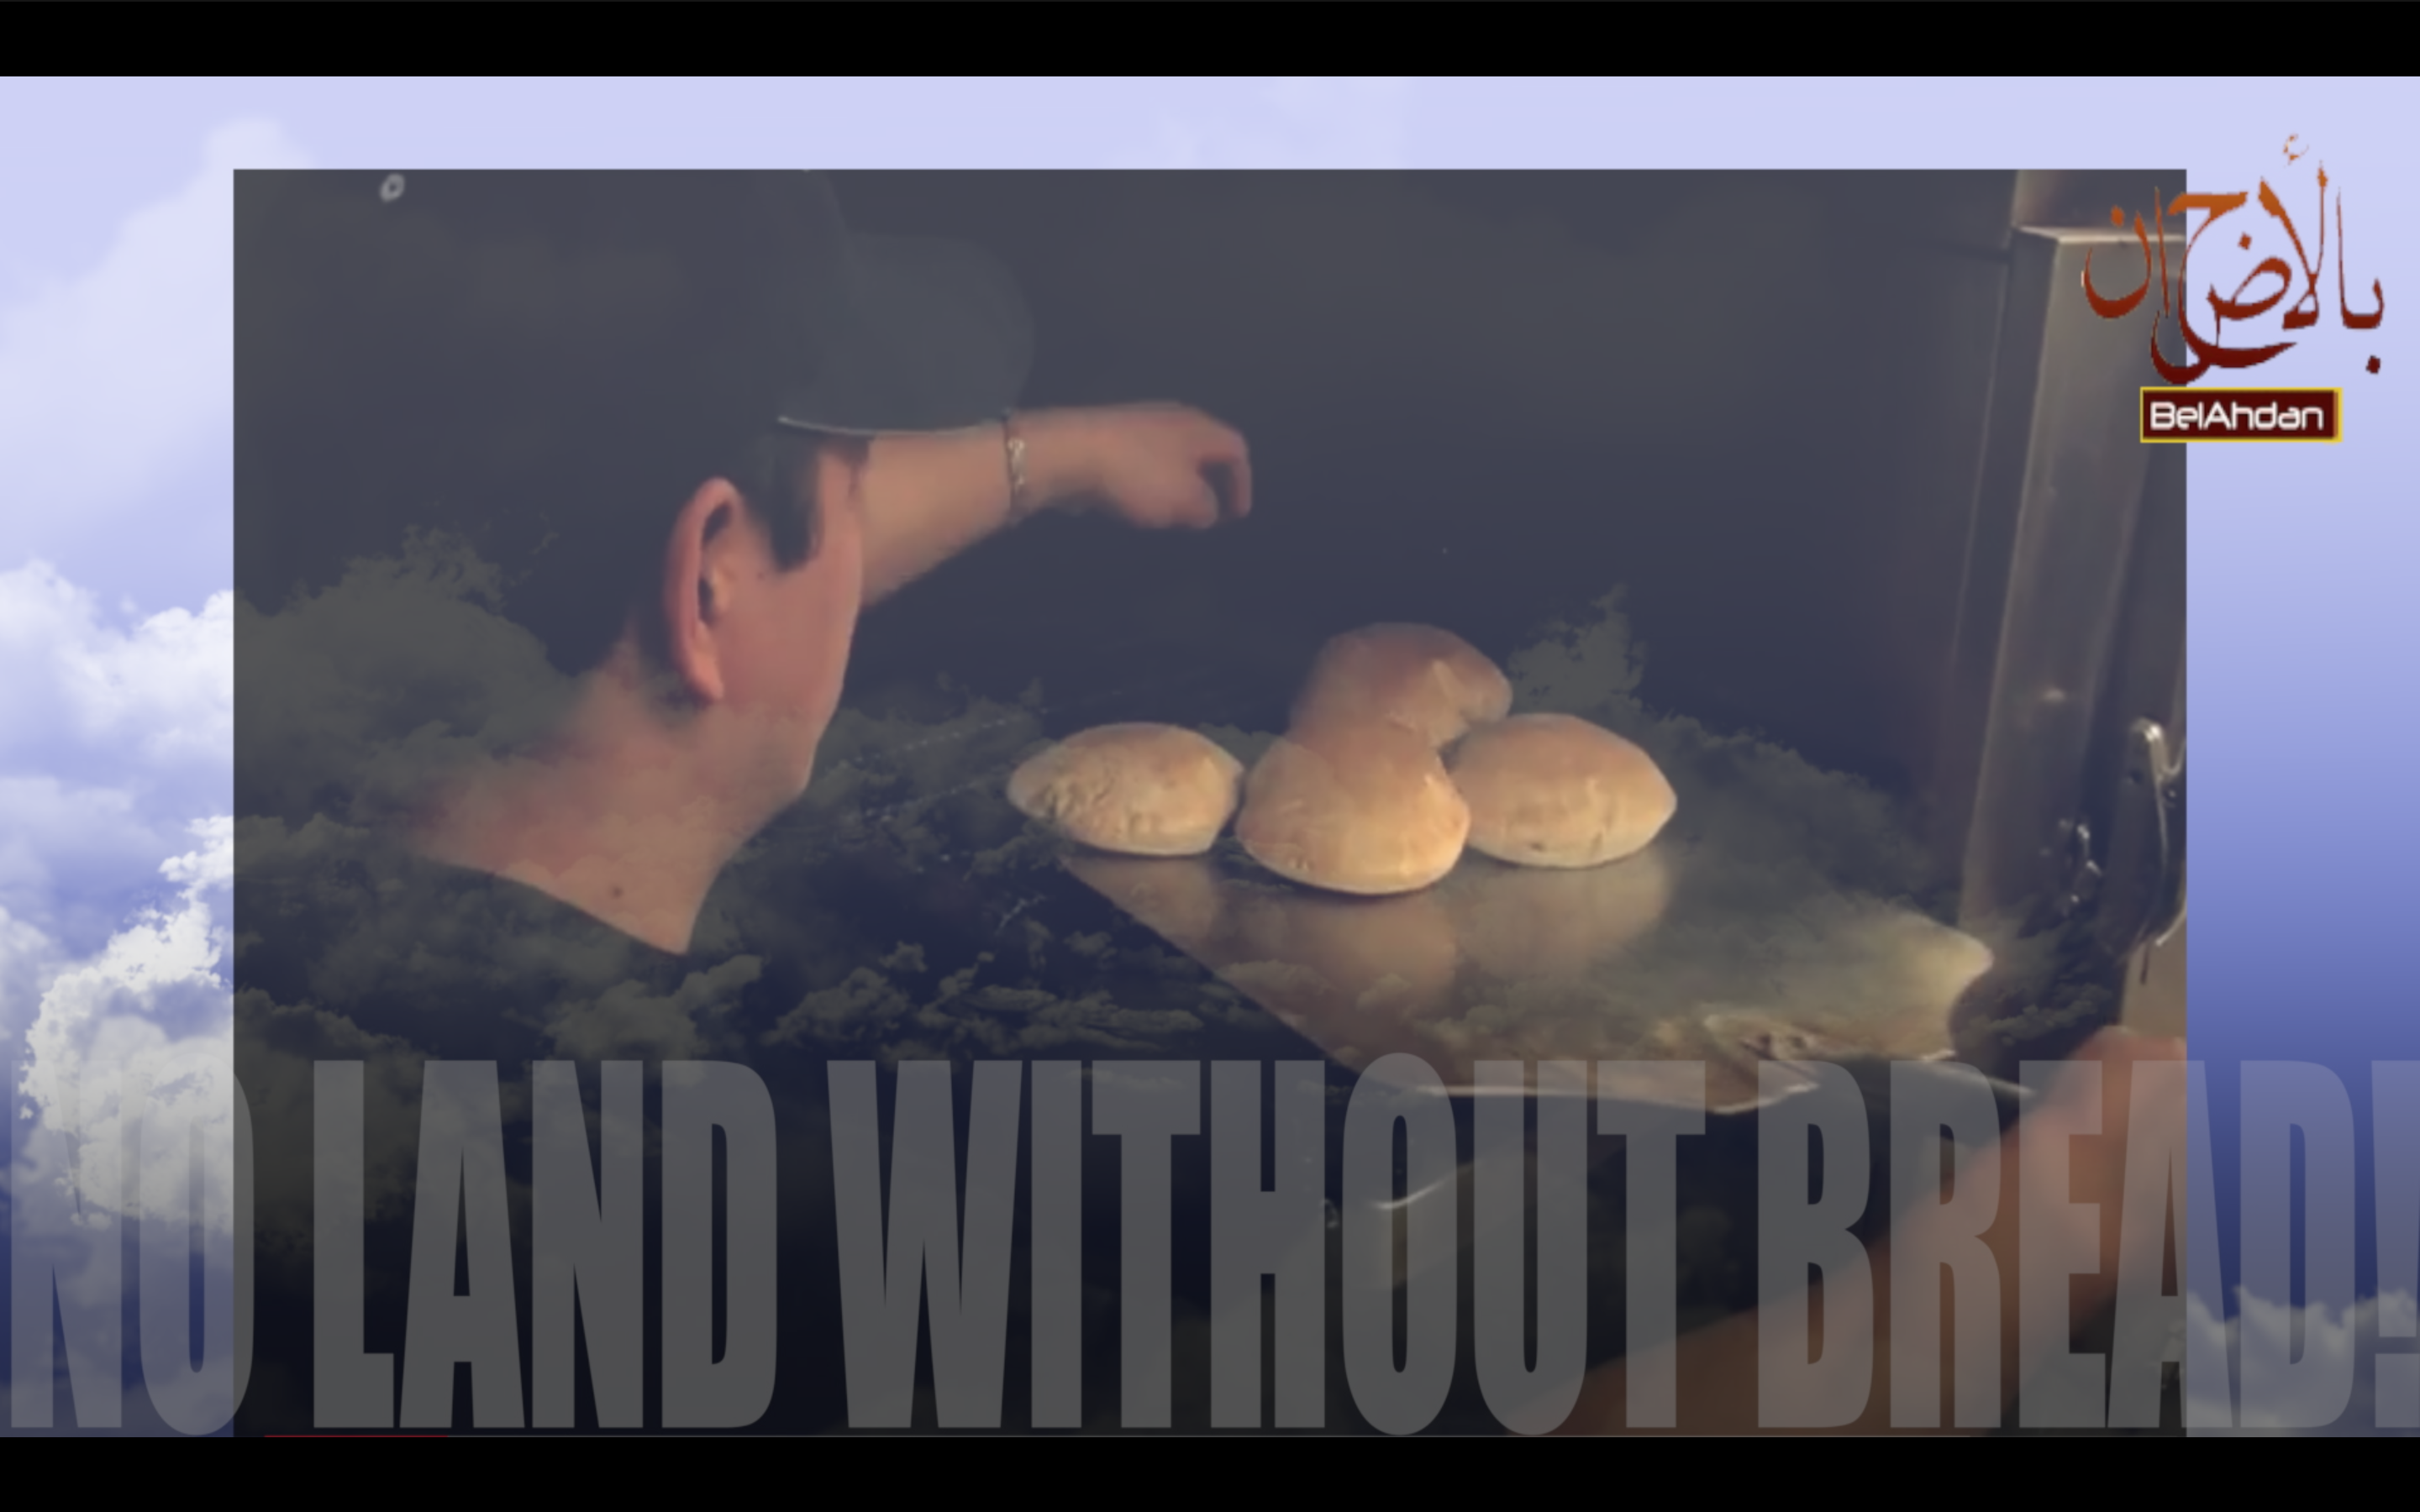 NO LAND WITHOUT BREAD… !